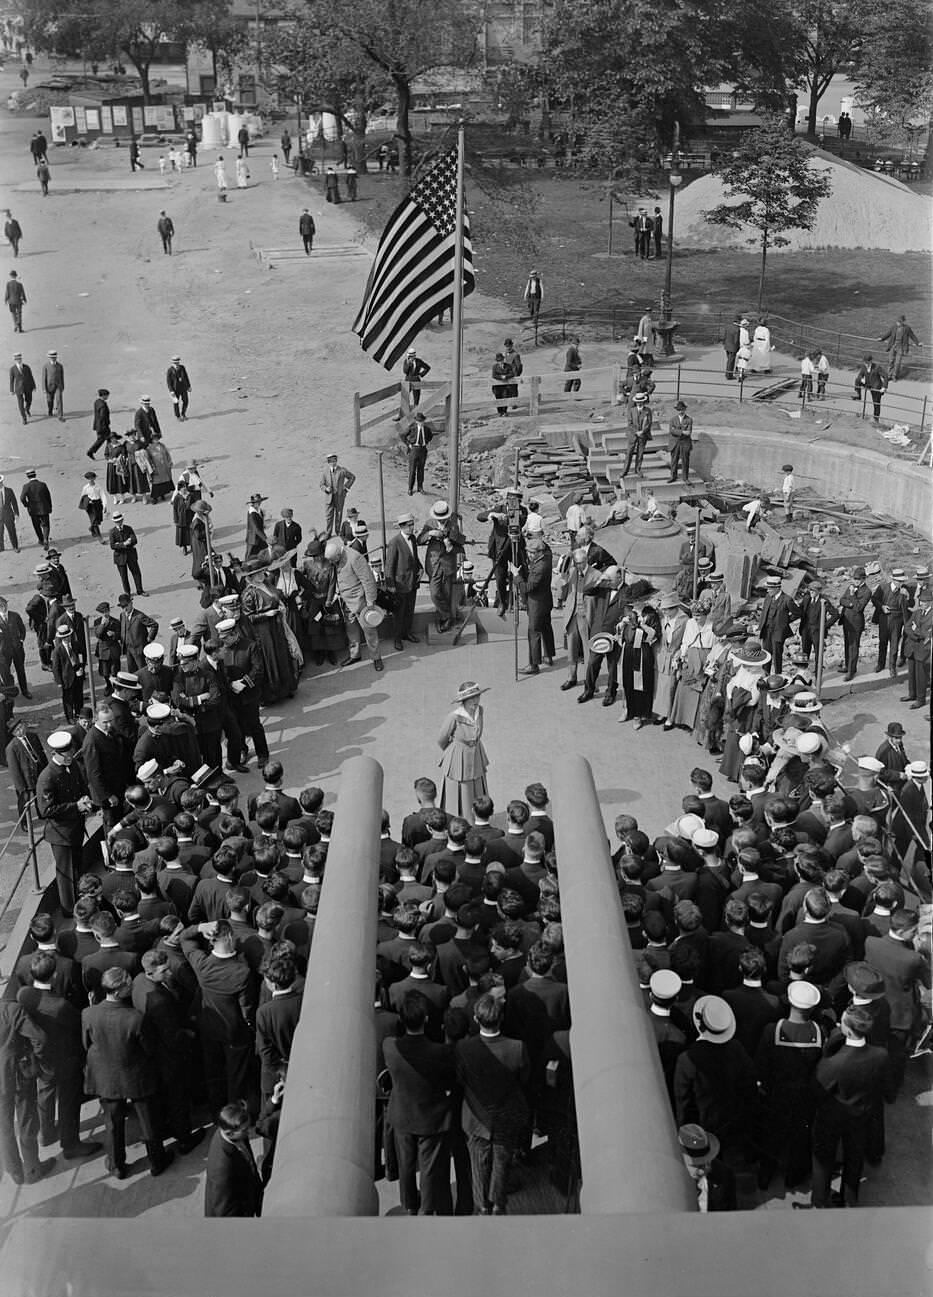 Margaret Murray Crumpacker, Commandant Of The Women'S Auxiliary For Naval Recruiting, Addressing Navy Recruits Under The Guns Of The Uss Recruit, 1917.